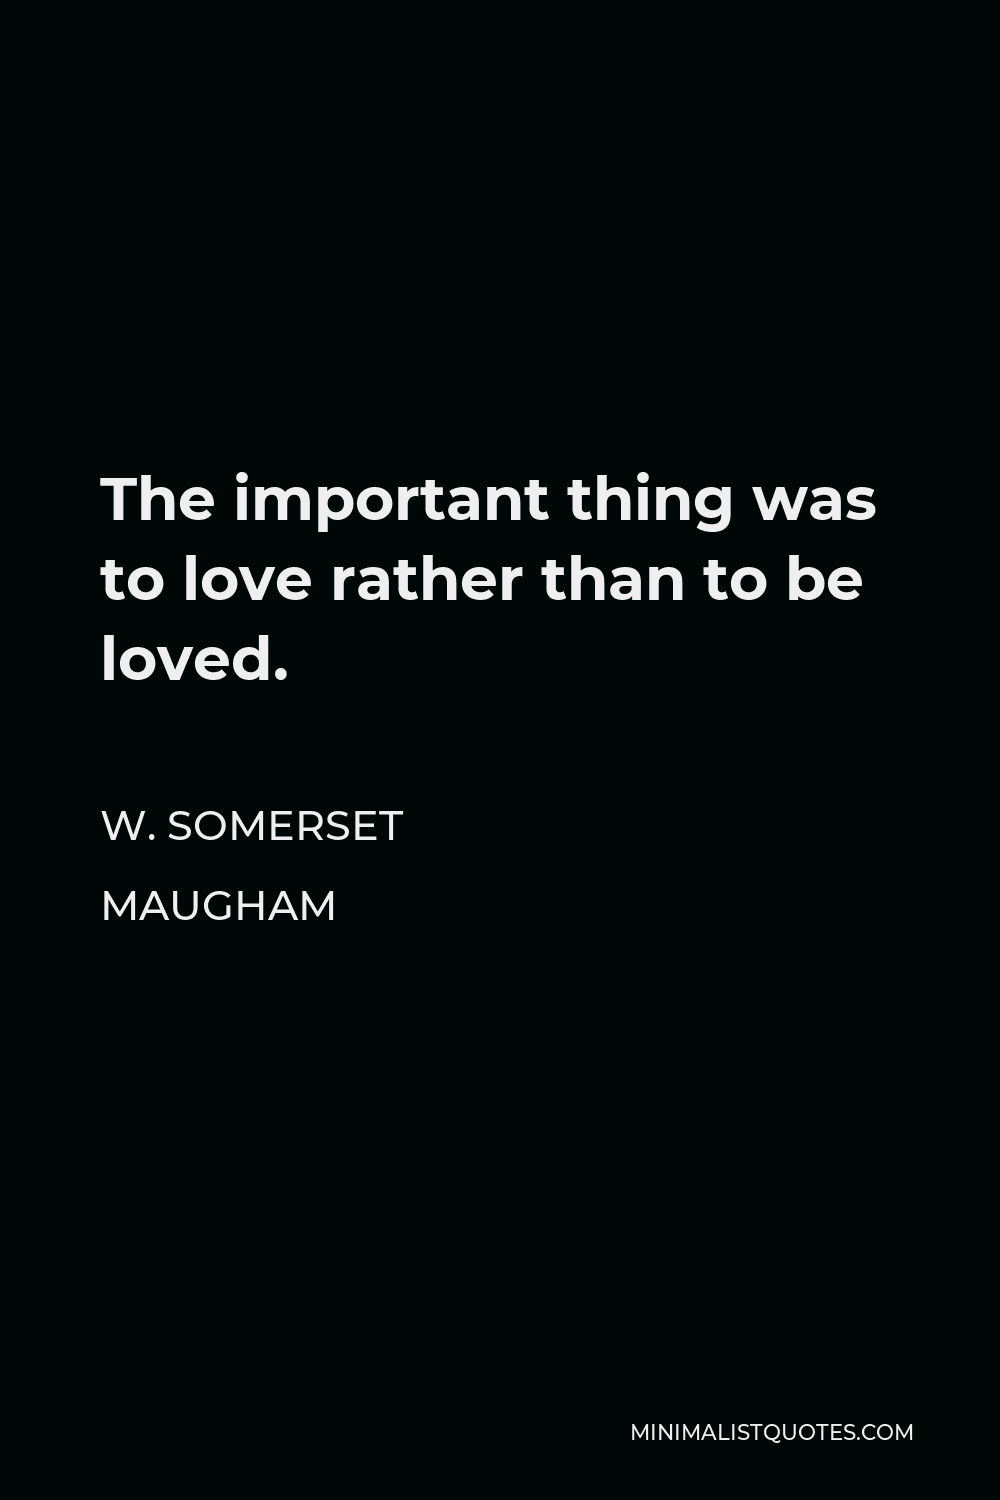 W. Somerset Maugham Quote - The important thing was to love rather than to be loved.